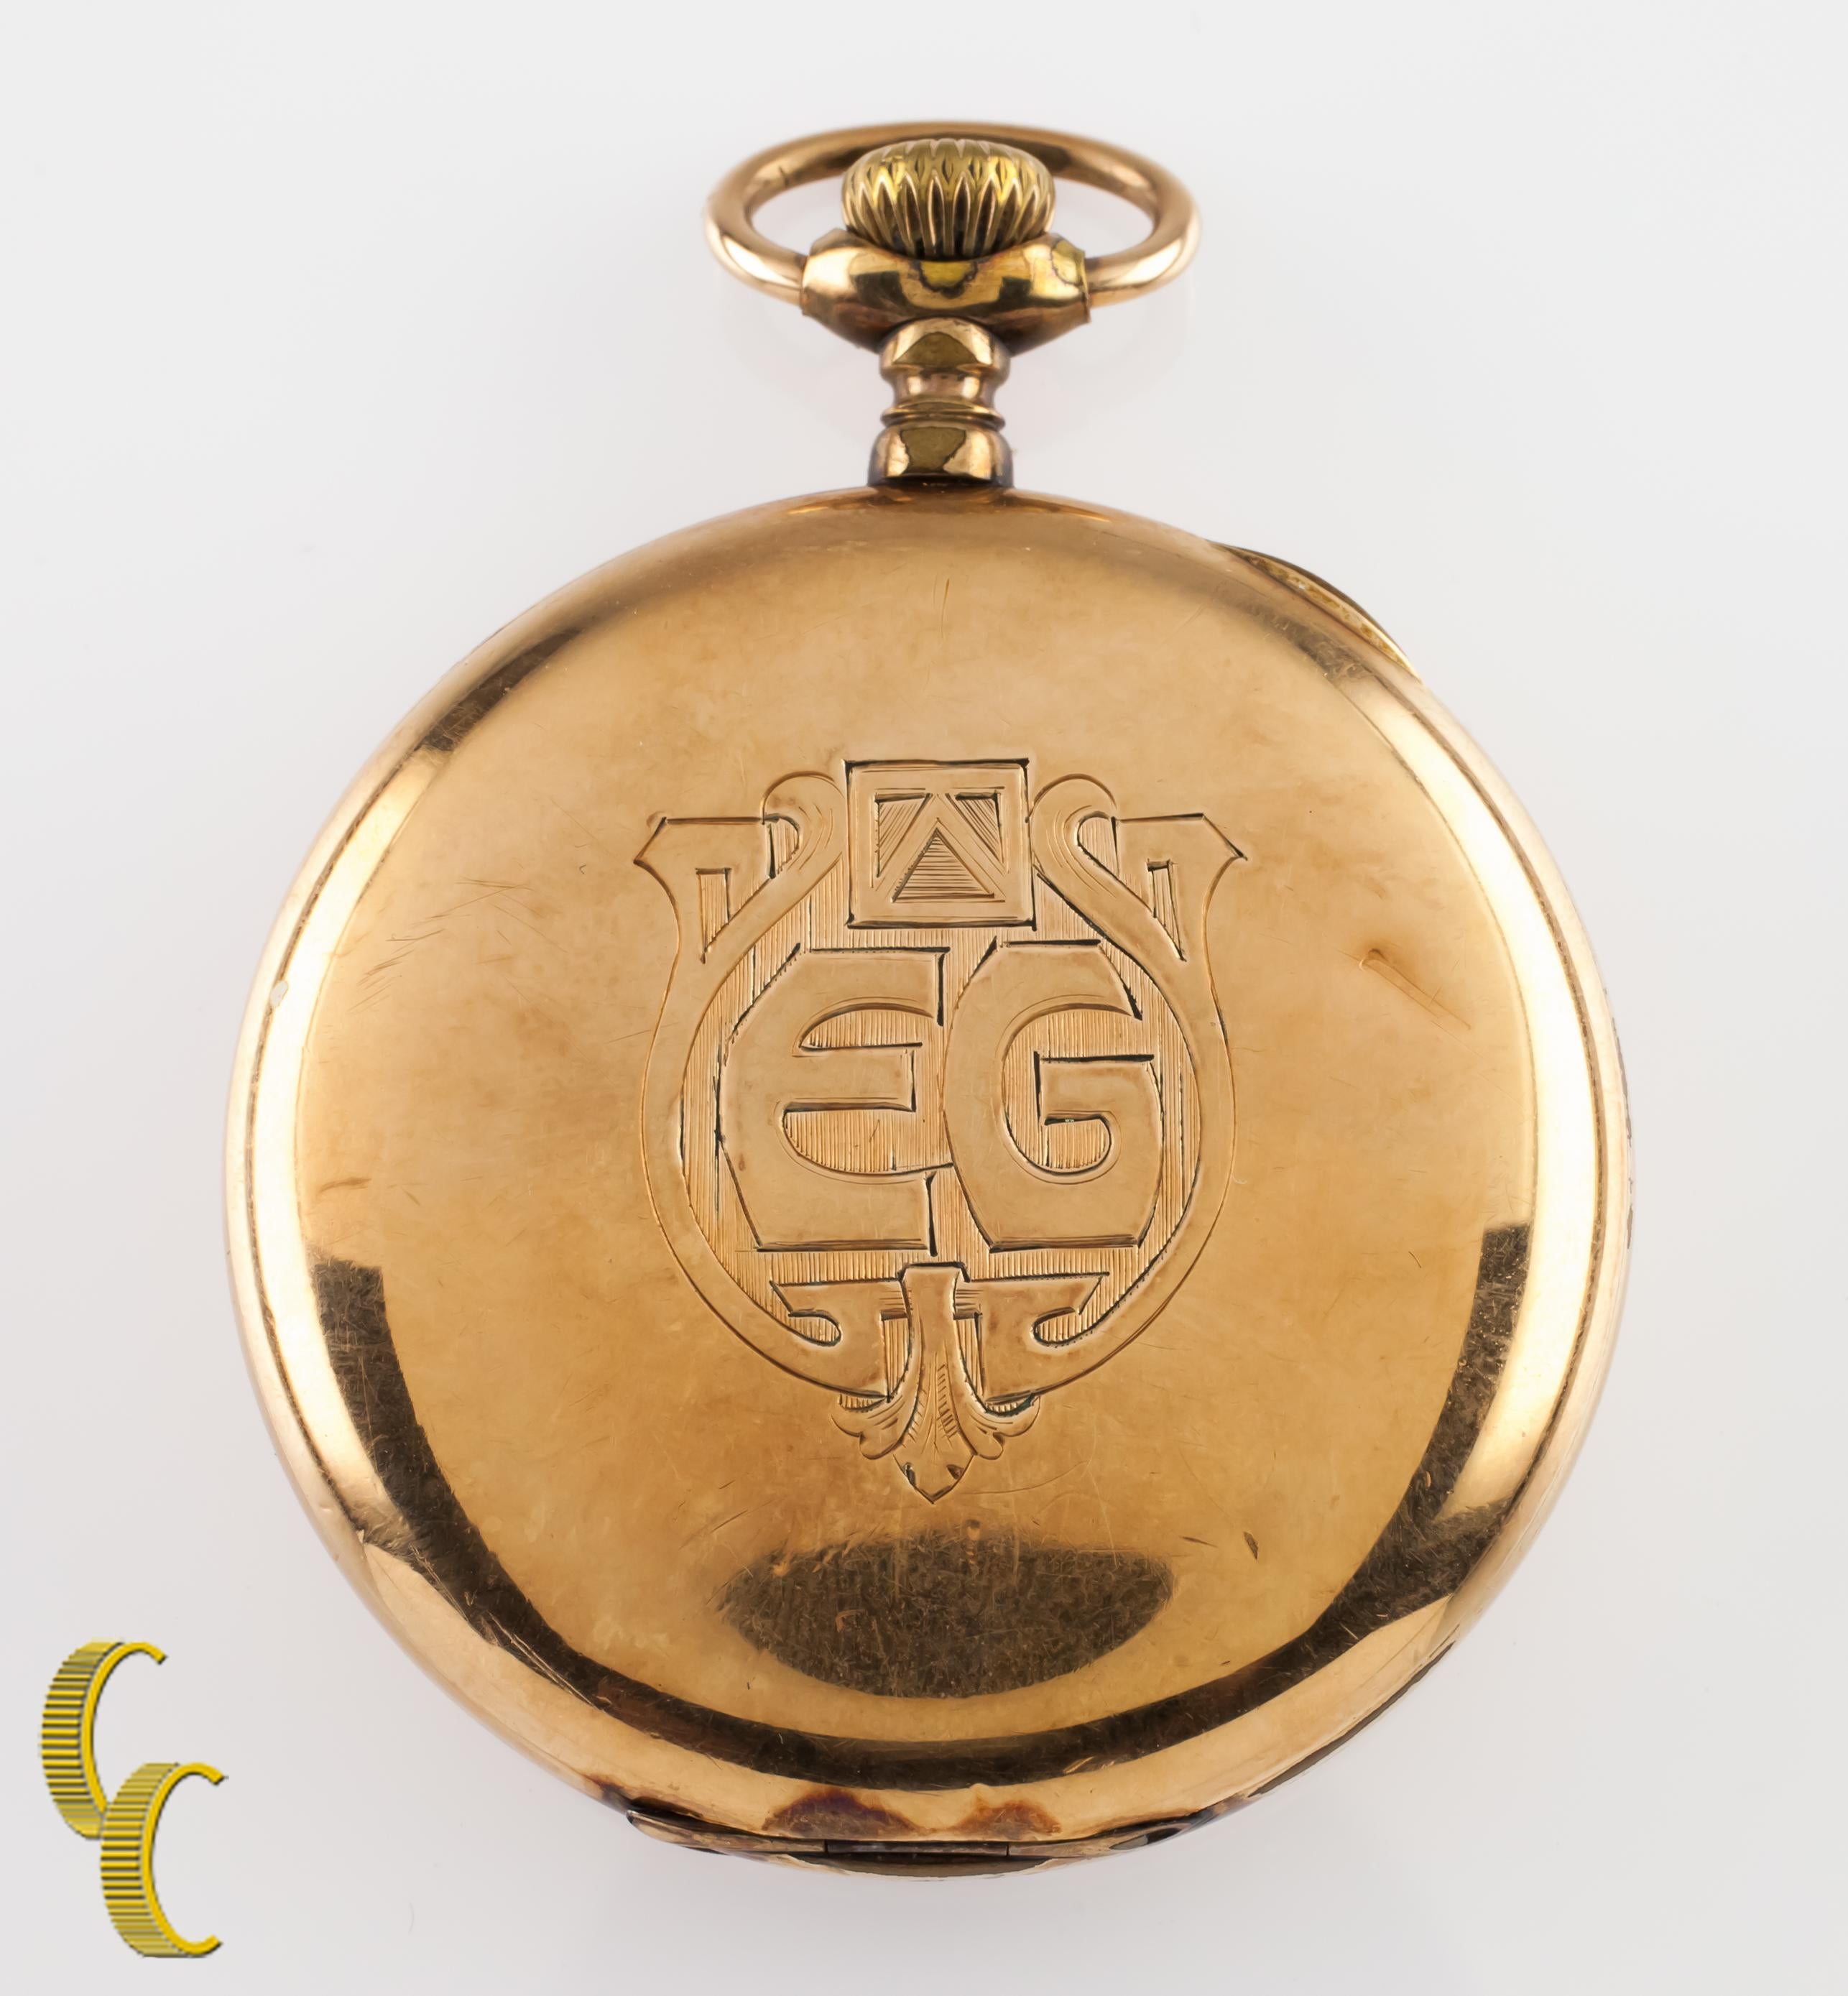 Beautiful Antique Elgin Pocket Watch w/ White Dial Including Cobalt Blue Hands & Dedicated Second Dial
Yellow Gold Filled Case w/ Intricate Hand-Etched 